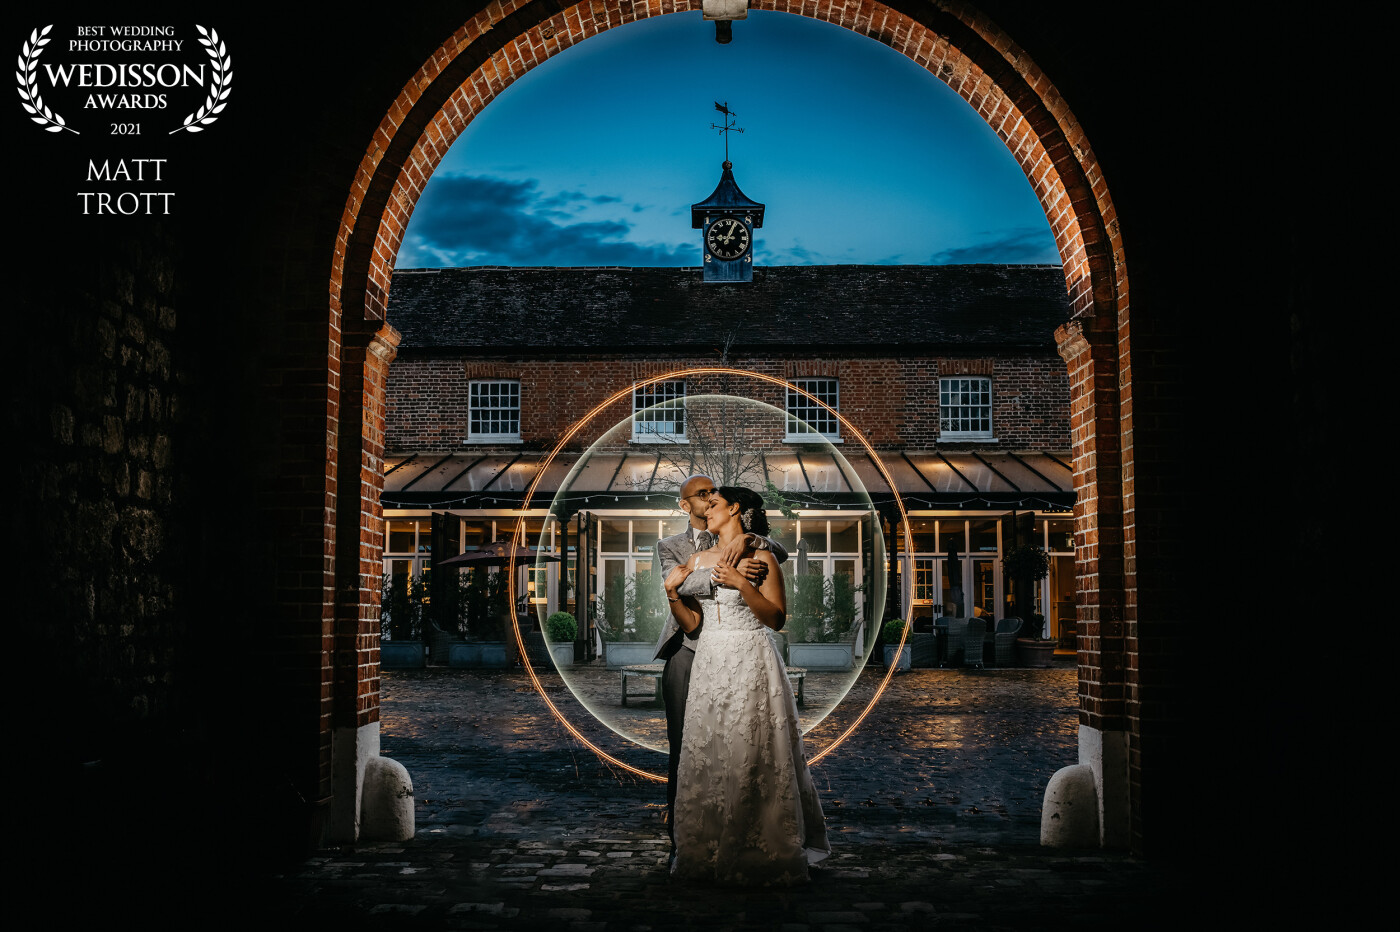 This photo was taken at the secret garden in kent, UK. The couple came back after the wedding so we can spend some extra time getting them something amazing. <br />
I had a flash with mag grid on the couple and two flashes pointing up at the archway to highlight it. The circle was created with one of my light painting tools. 